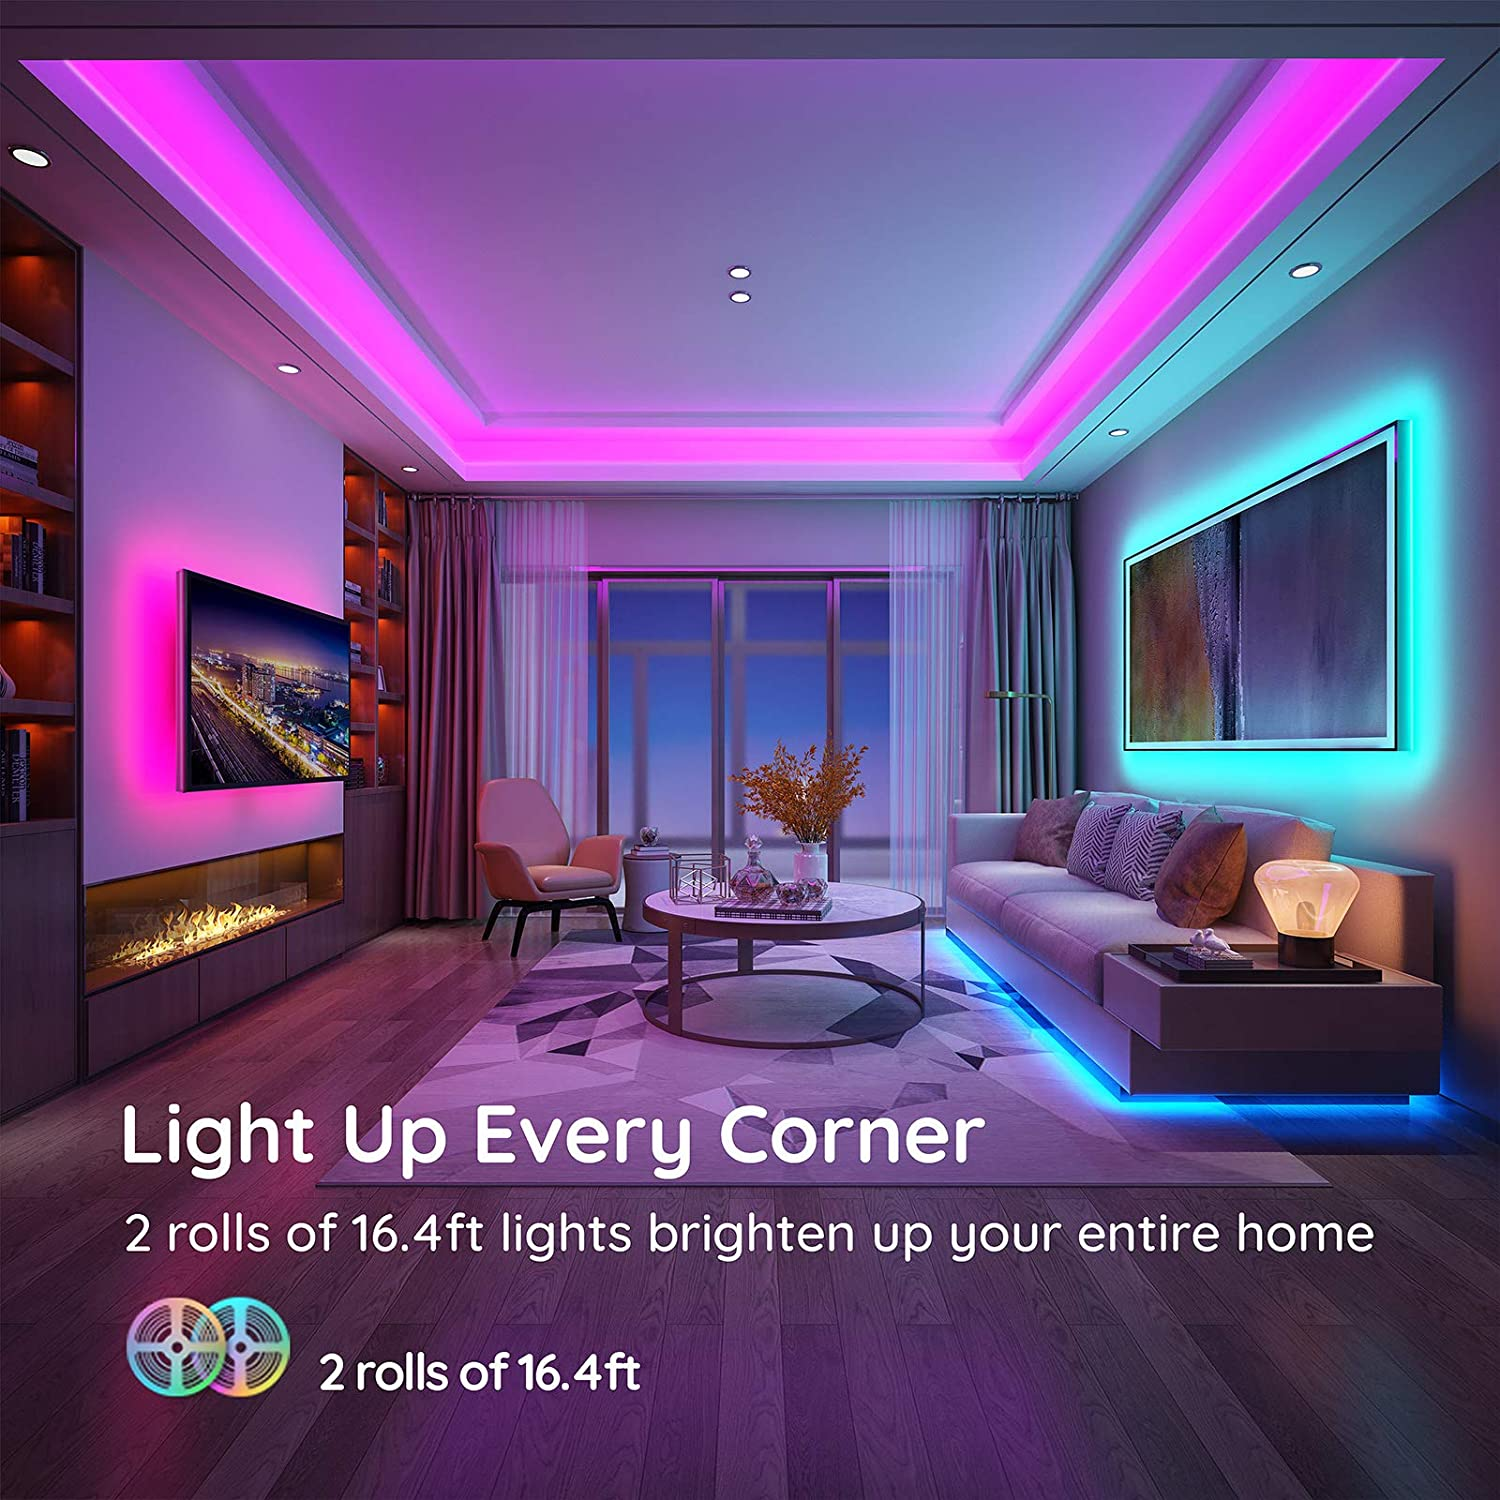 Govee LED Strip Lights Bluetooth App Control and Remote 16.4FT